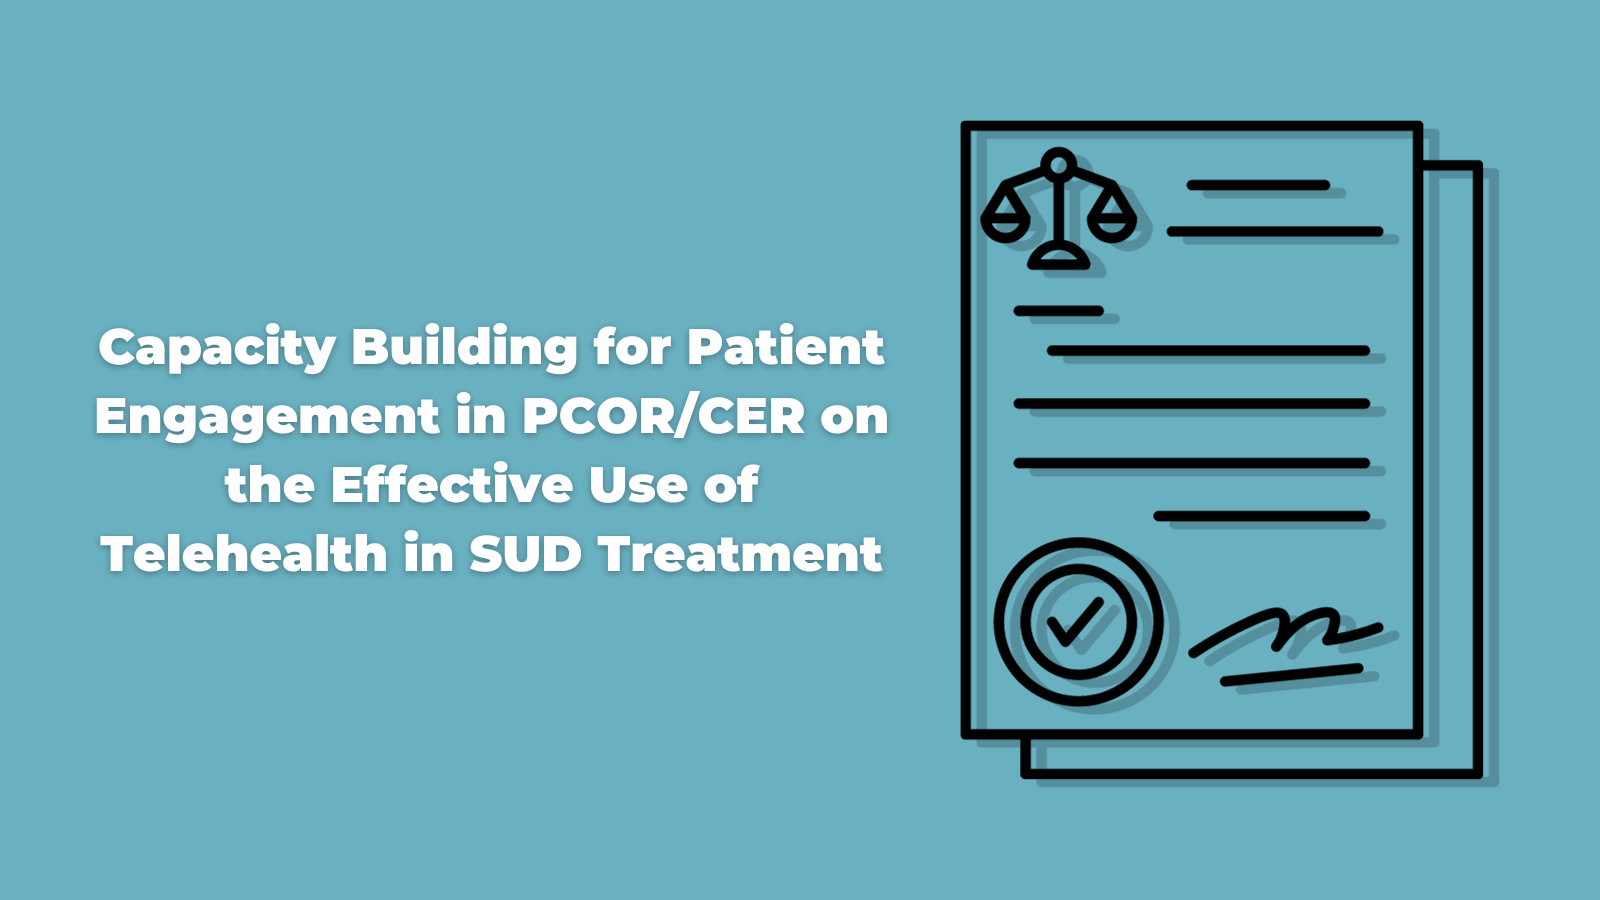 Capacity Building for Patient Engagement in PCOR/CER on the Effective Use of Telehealth in SUD Treatment